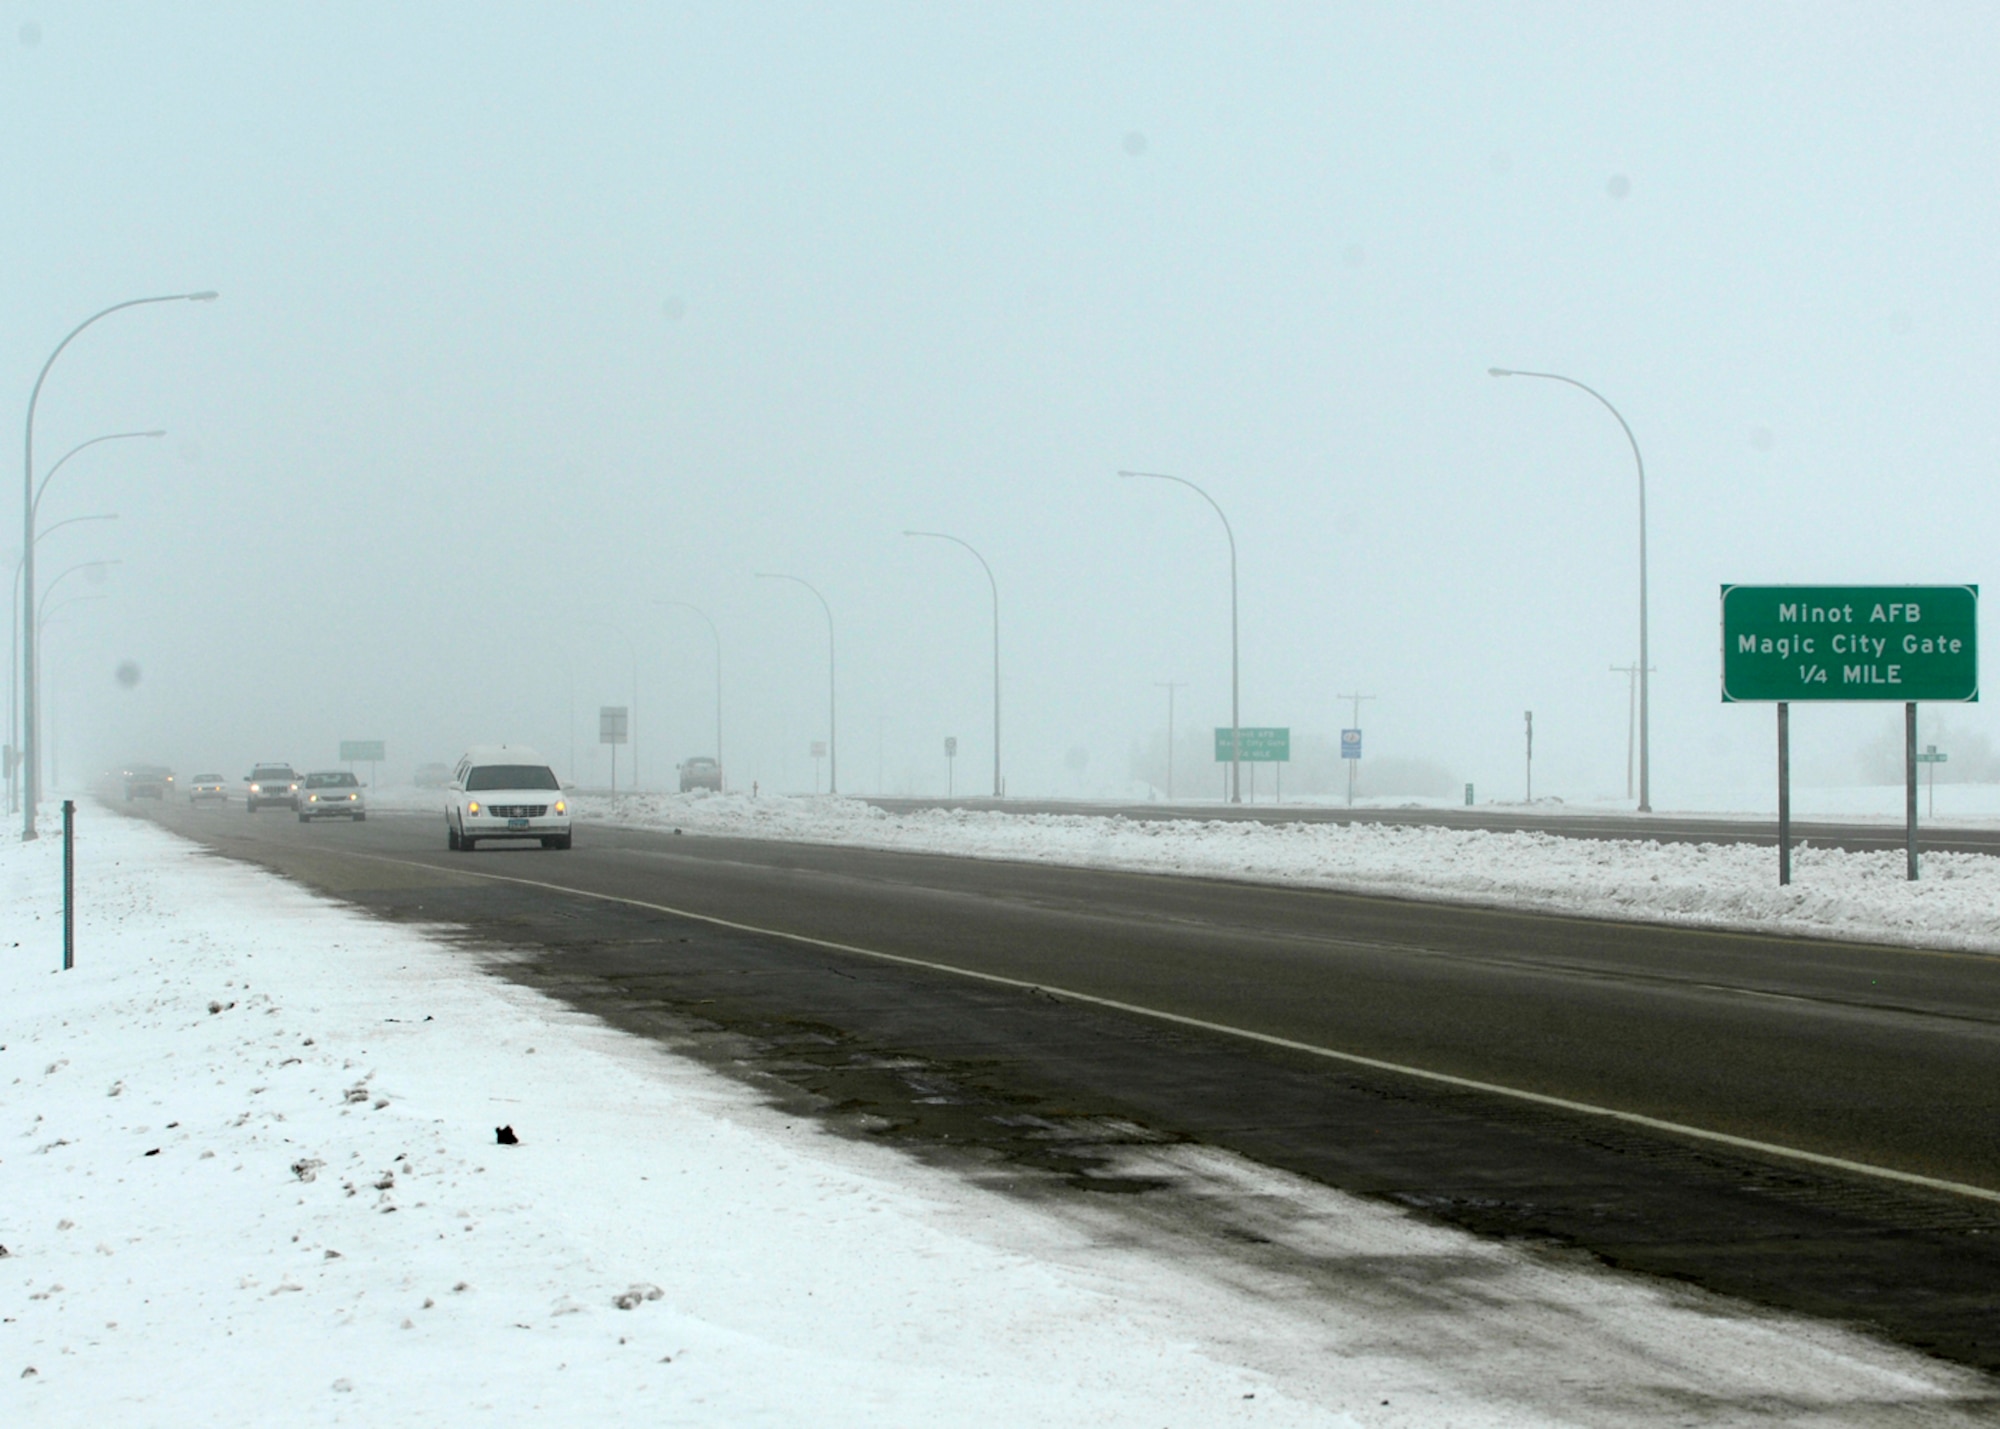 MINOT AIR FORCE BASE, N.D. -- Drivers travel through the fog on highway 83 Feb. 22. Thick fog is one of the many winter hazards all drivers should be aware and take caution. (U.S. Air Force photo by Airman 1st Class Ashley N. Avecilla)